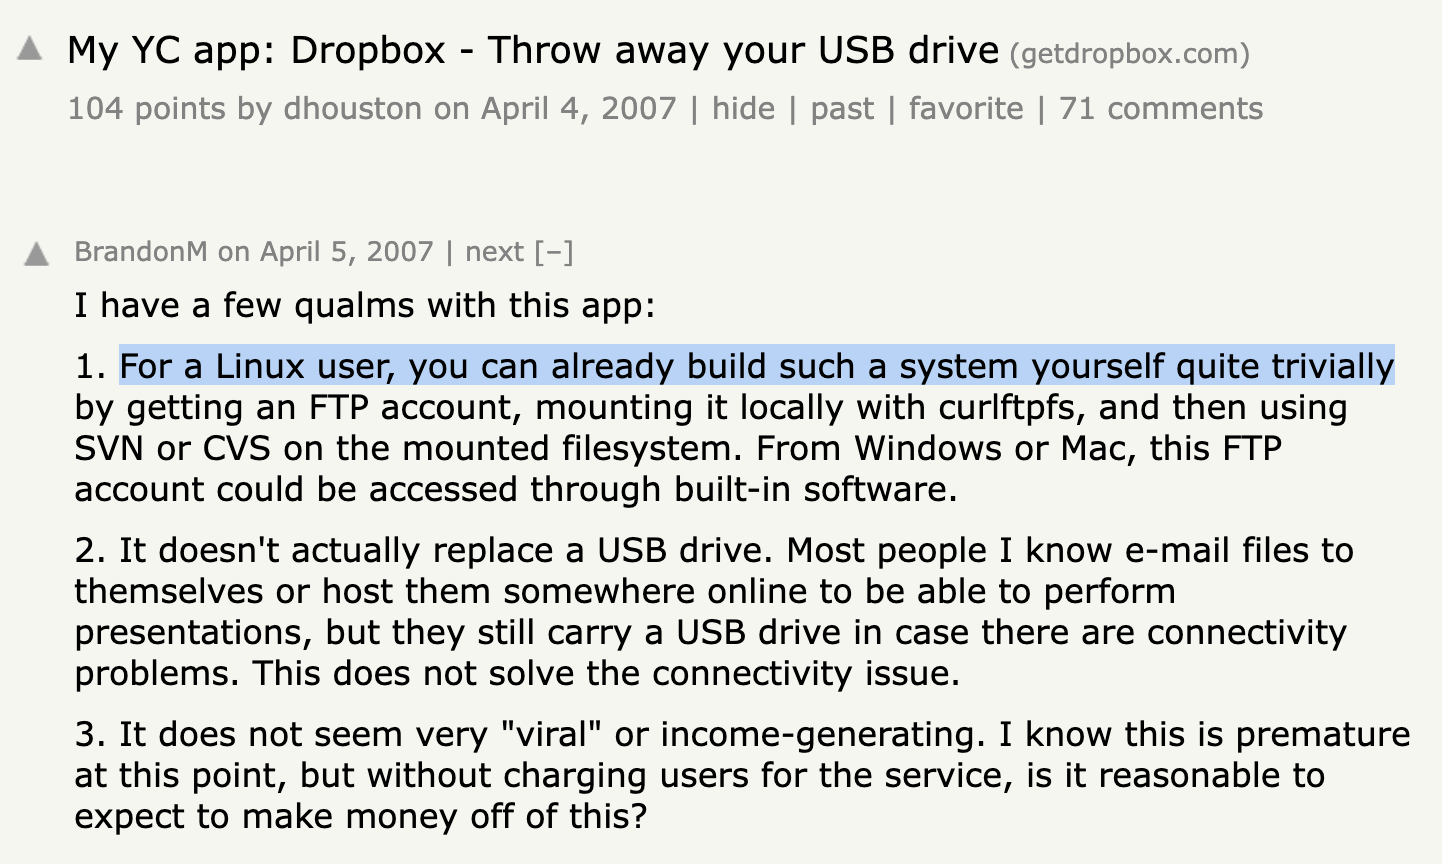 "For a Linux user, you can already build [Dropbox] yourself quite trivially"